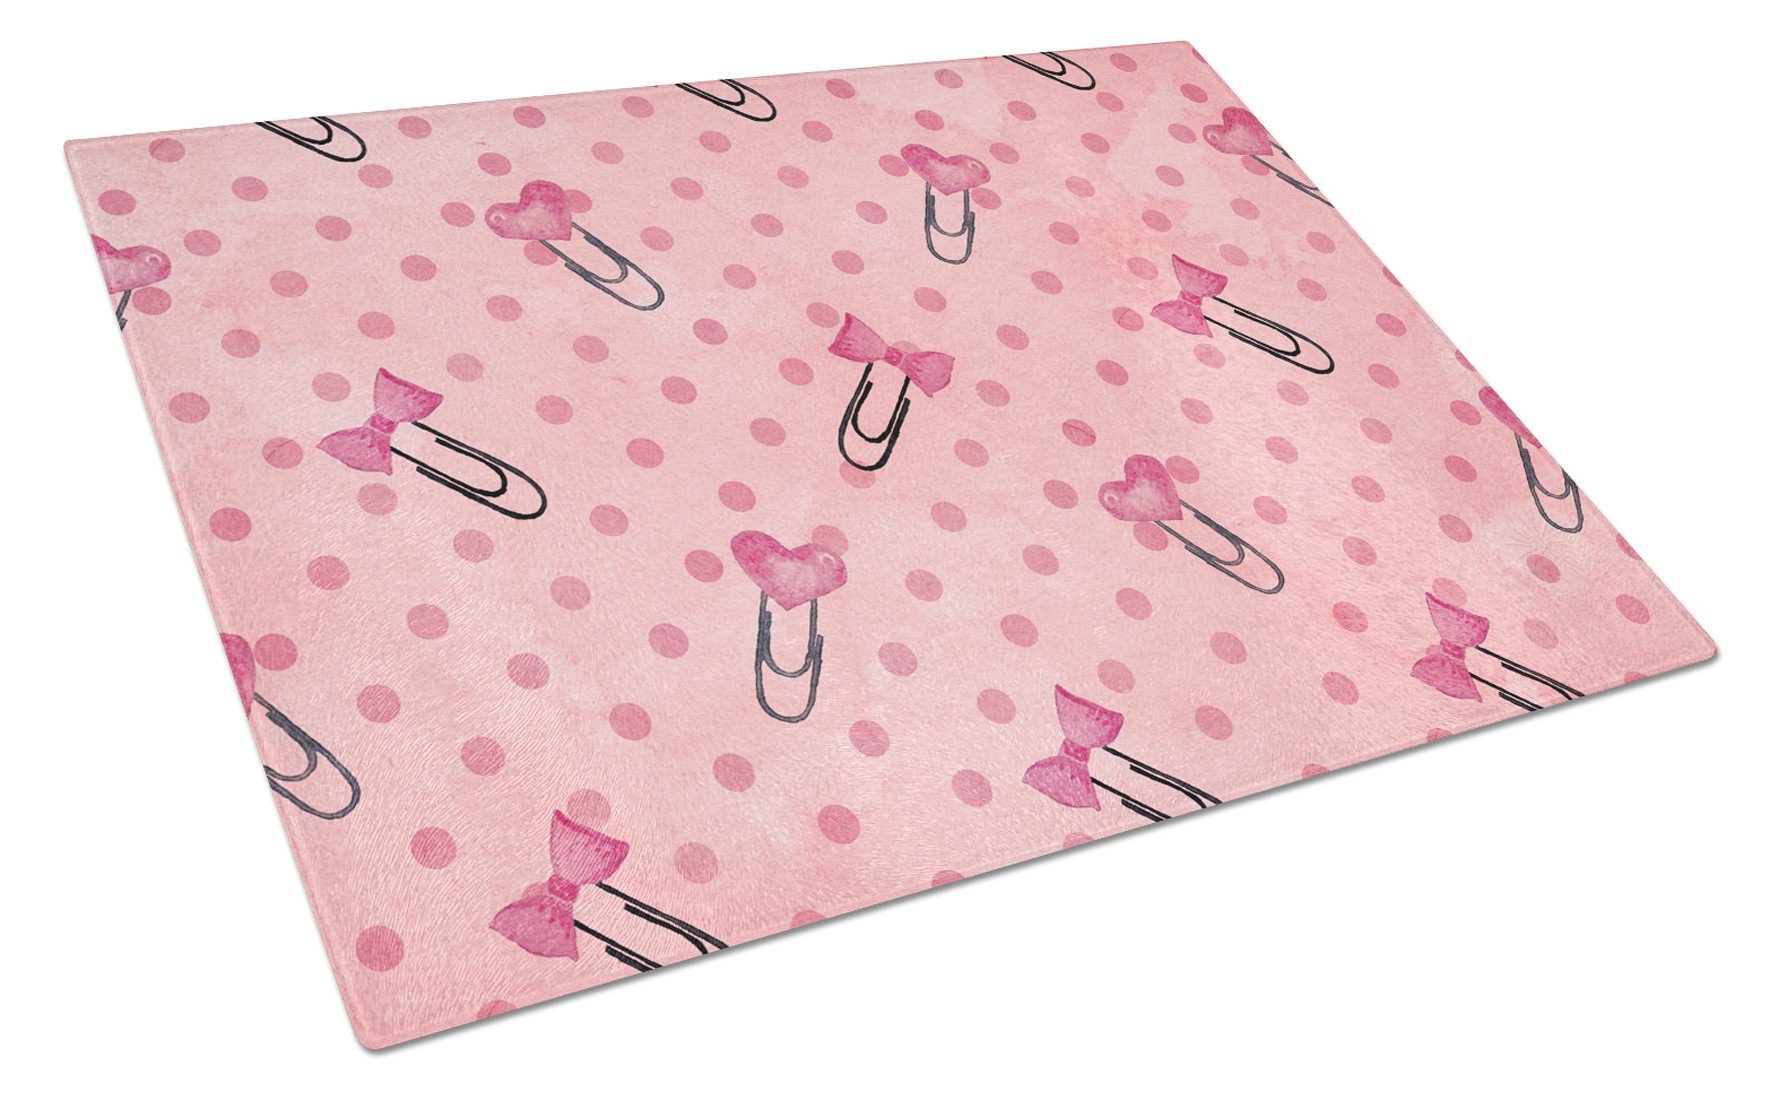 Watercolor Paper Clips and Polkadots Pink Glass Cutting Board Large BB7543LCB by Caroline's Treasures